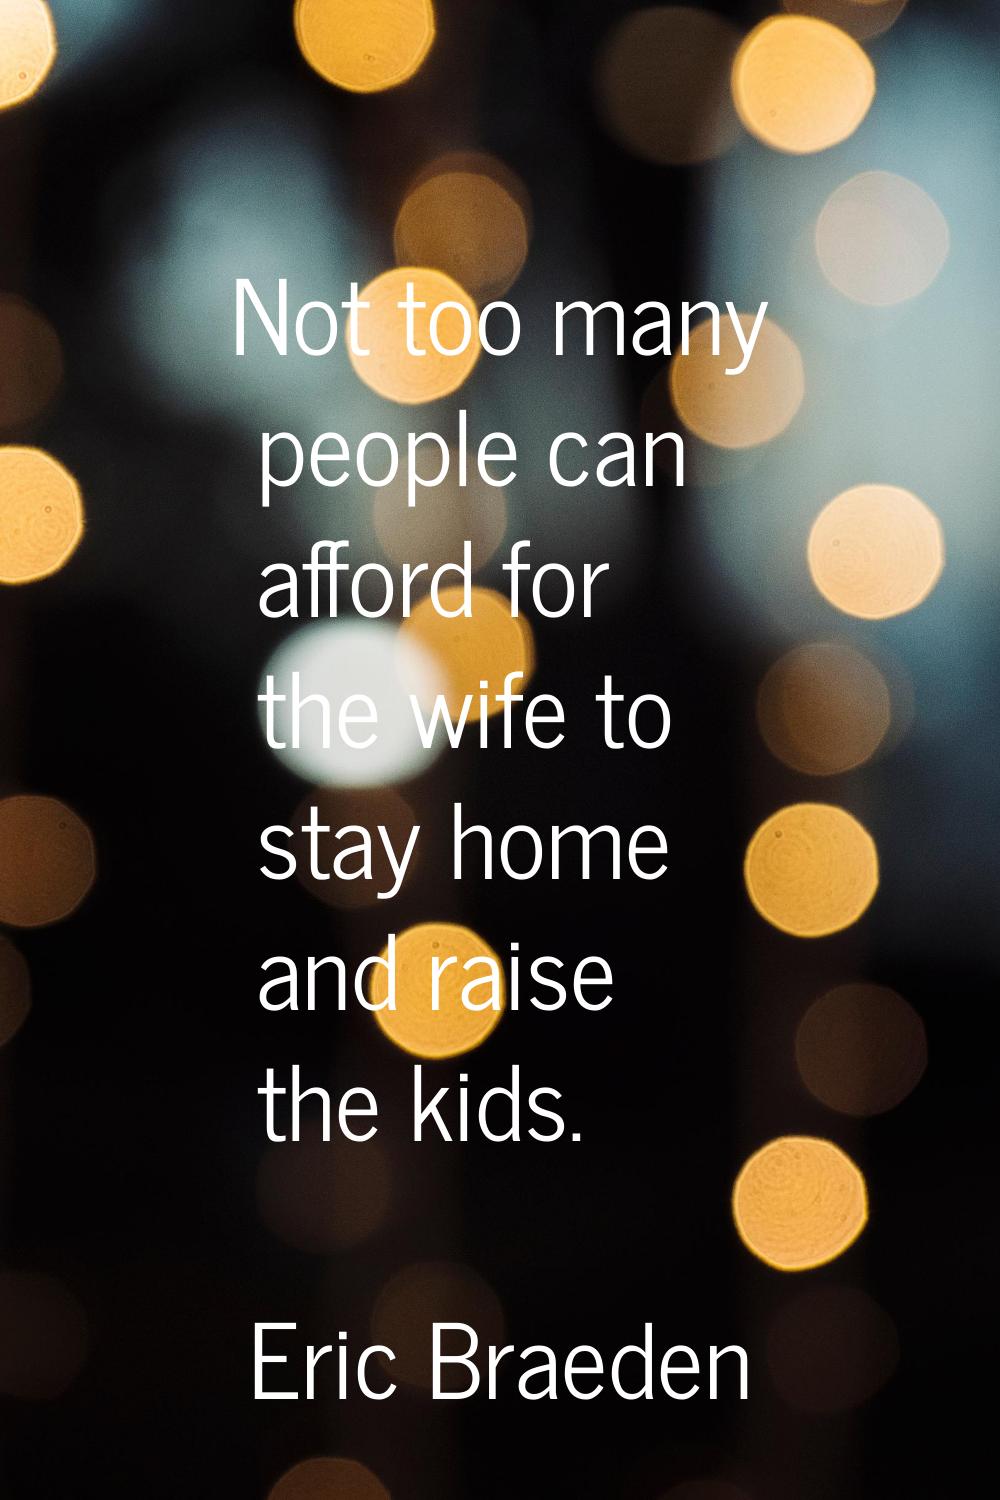 Not too many people can afford for the wife to stay home and raise the kids.